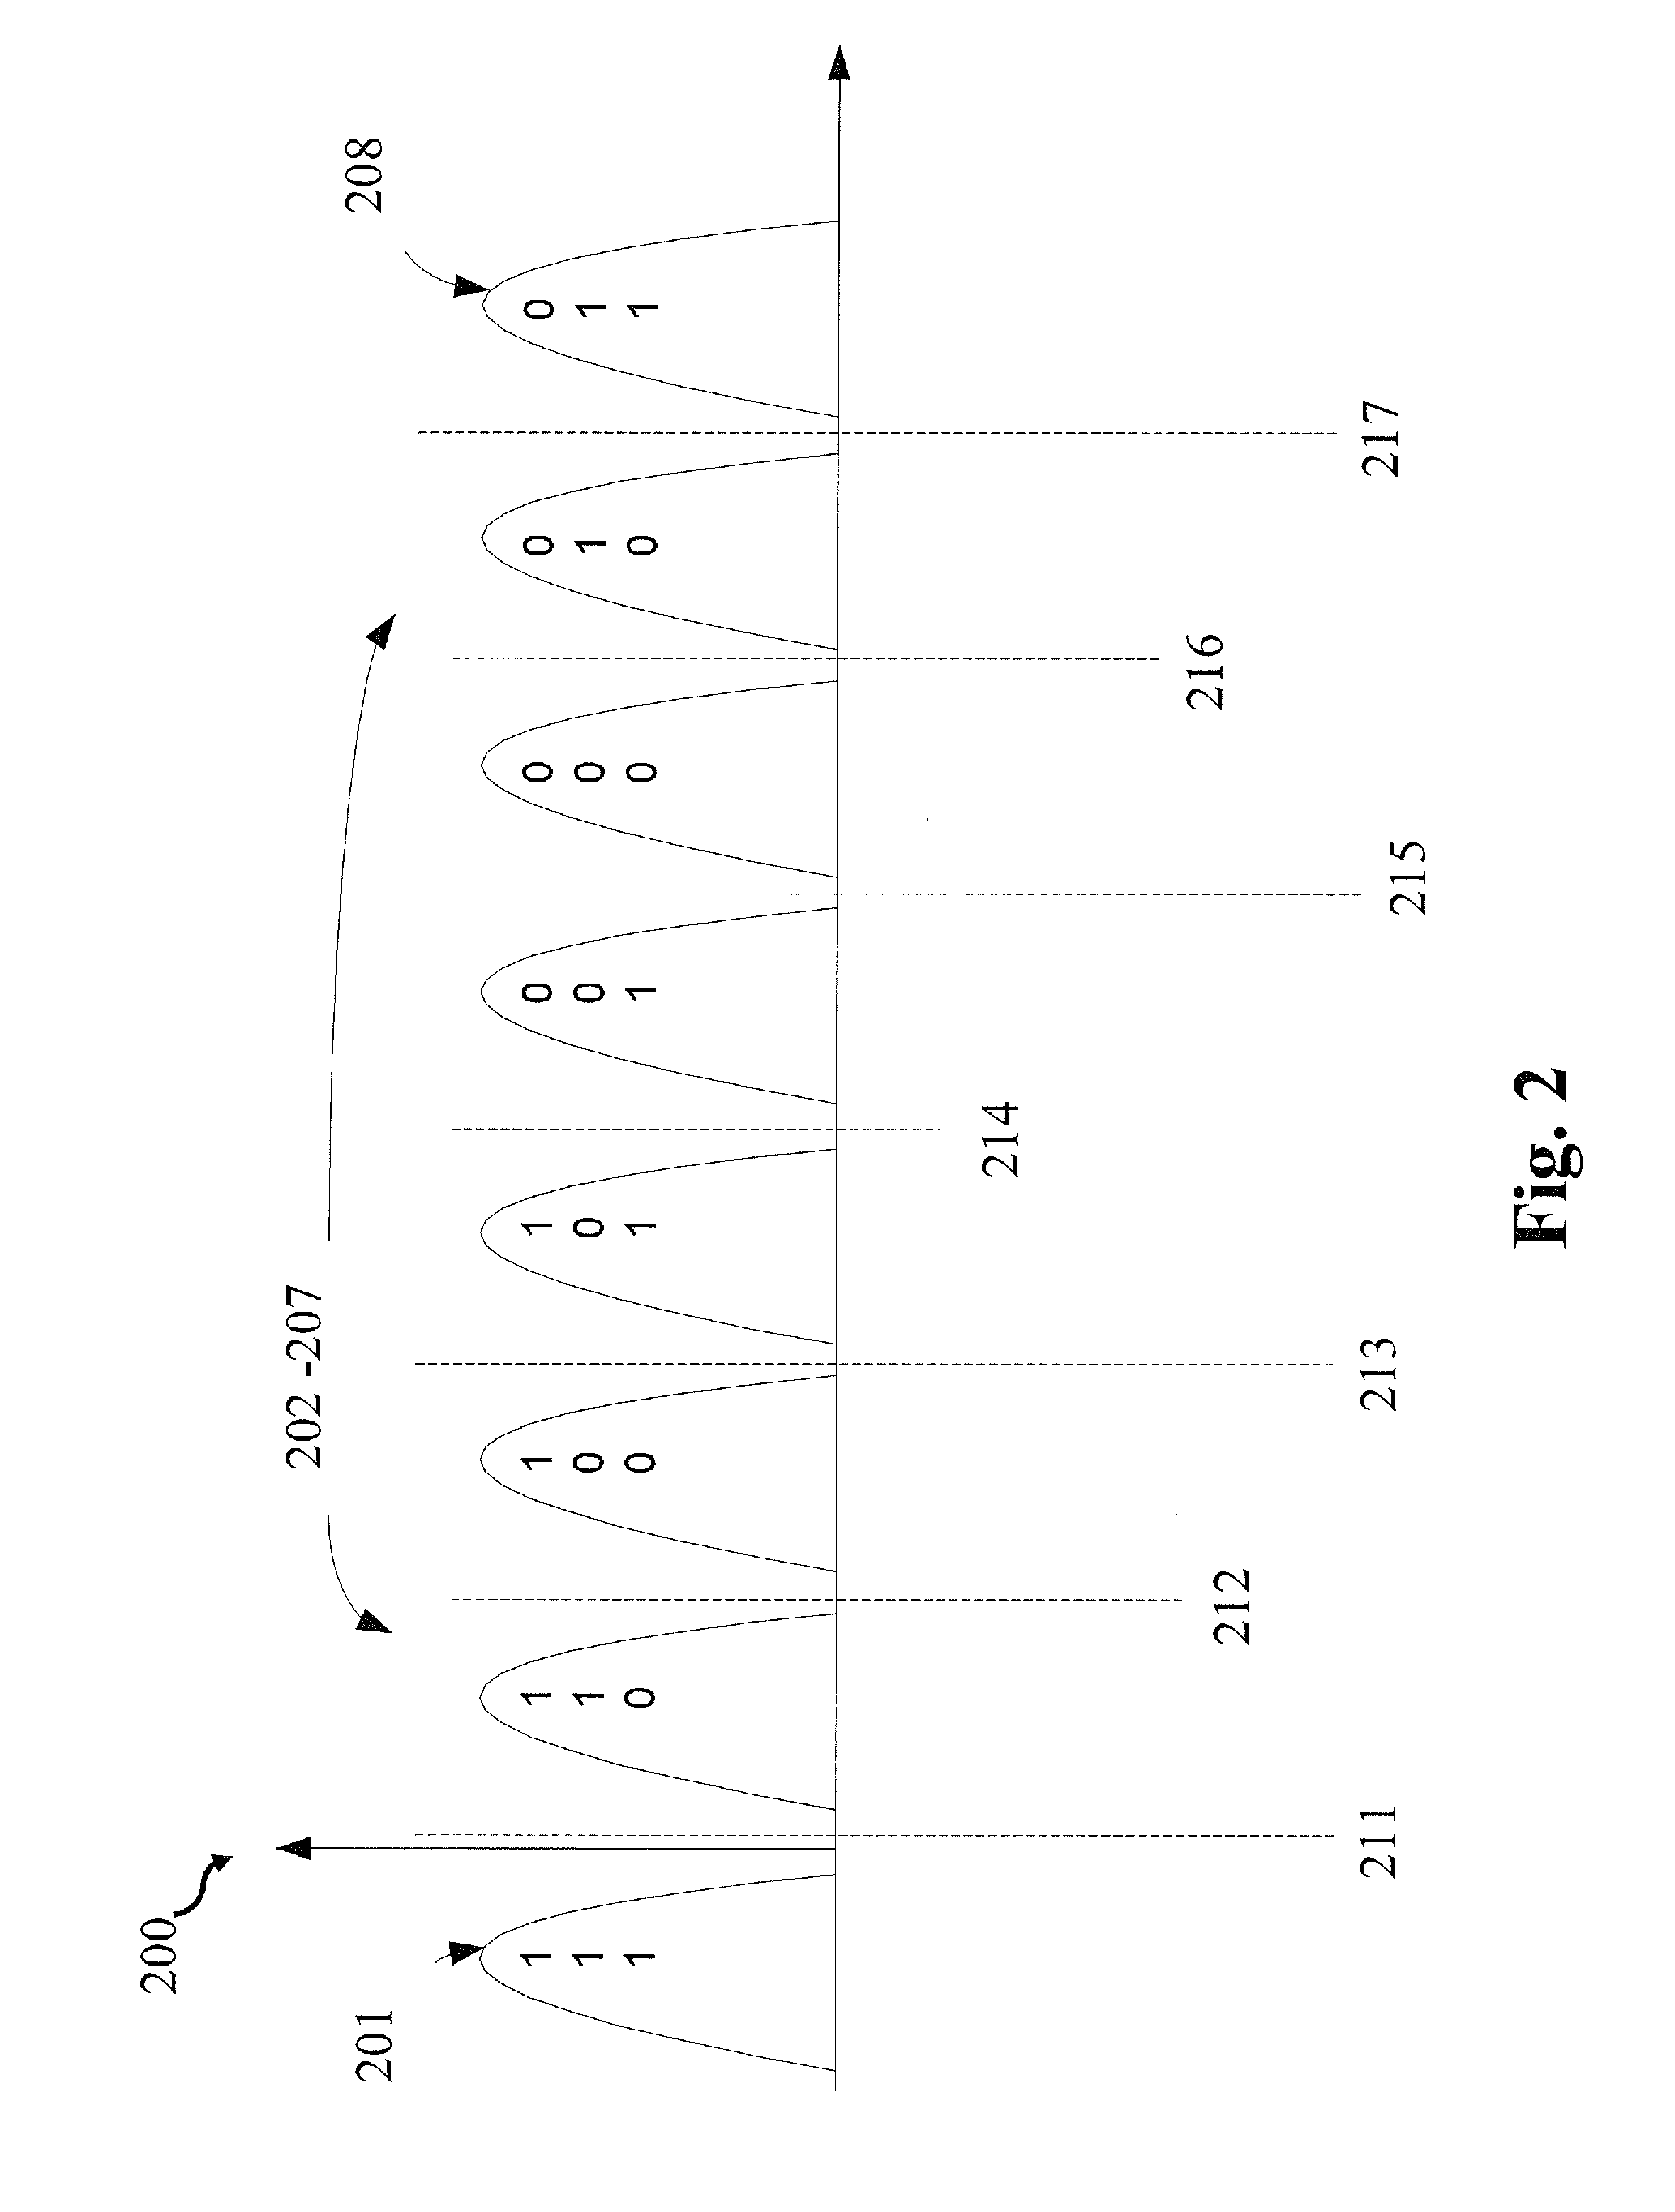 System and method for adjusting read voltage thresholds in memories